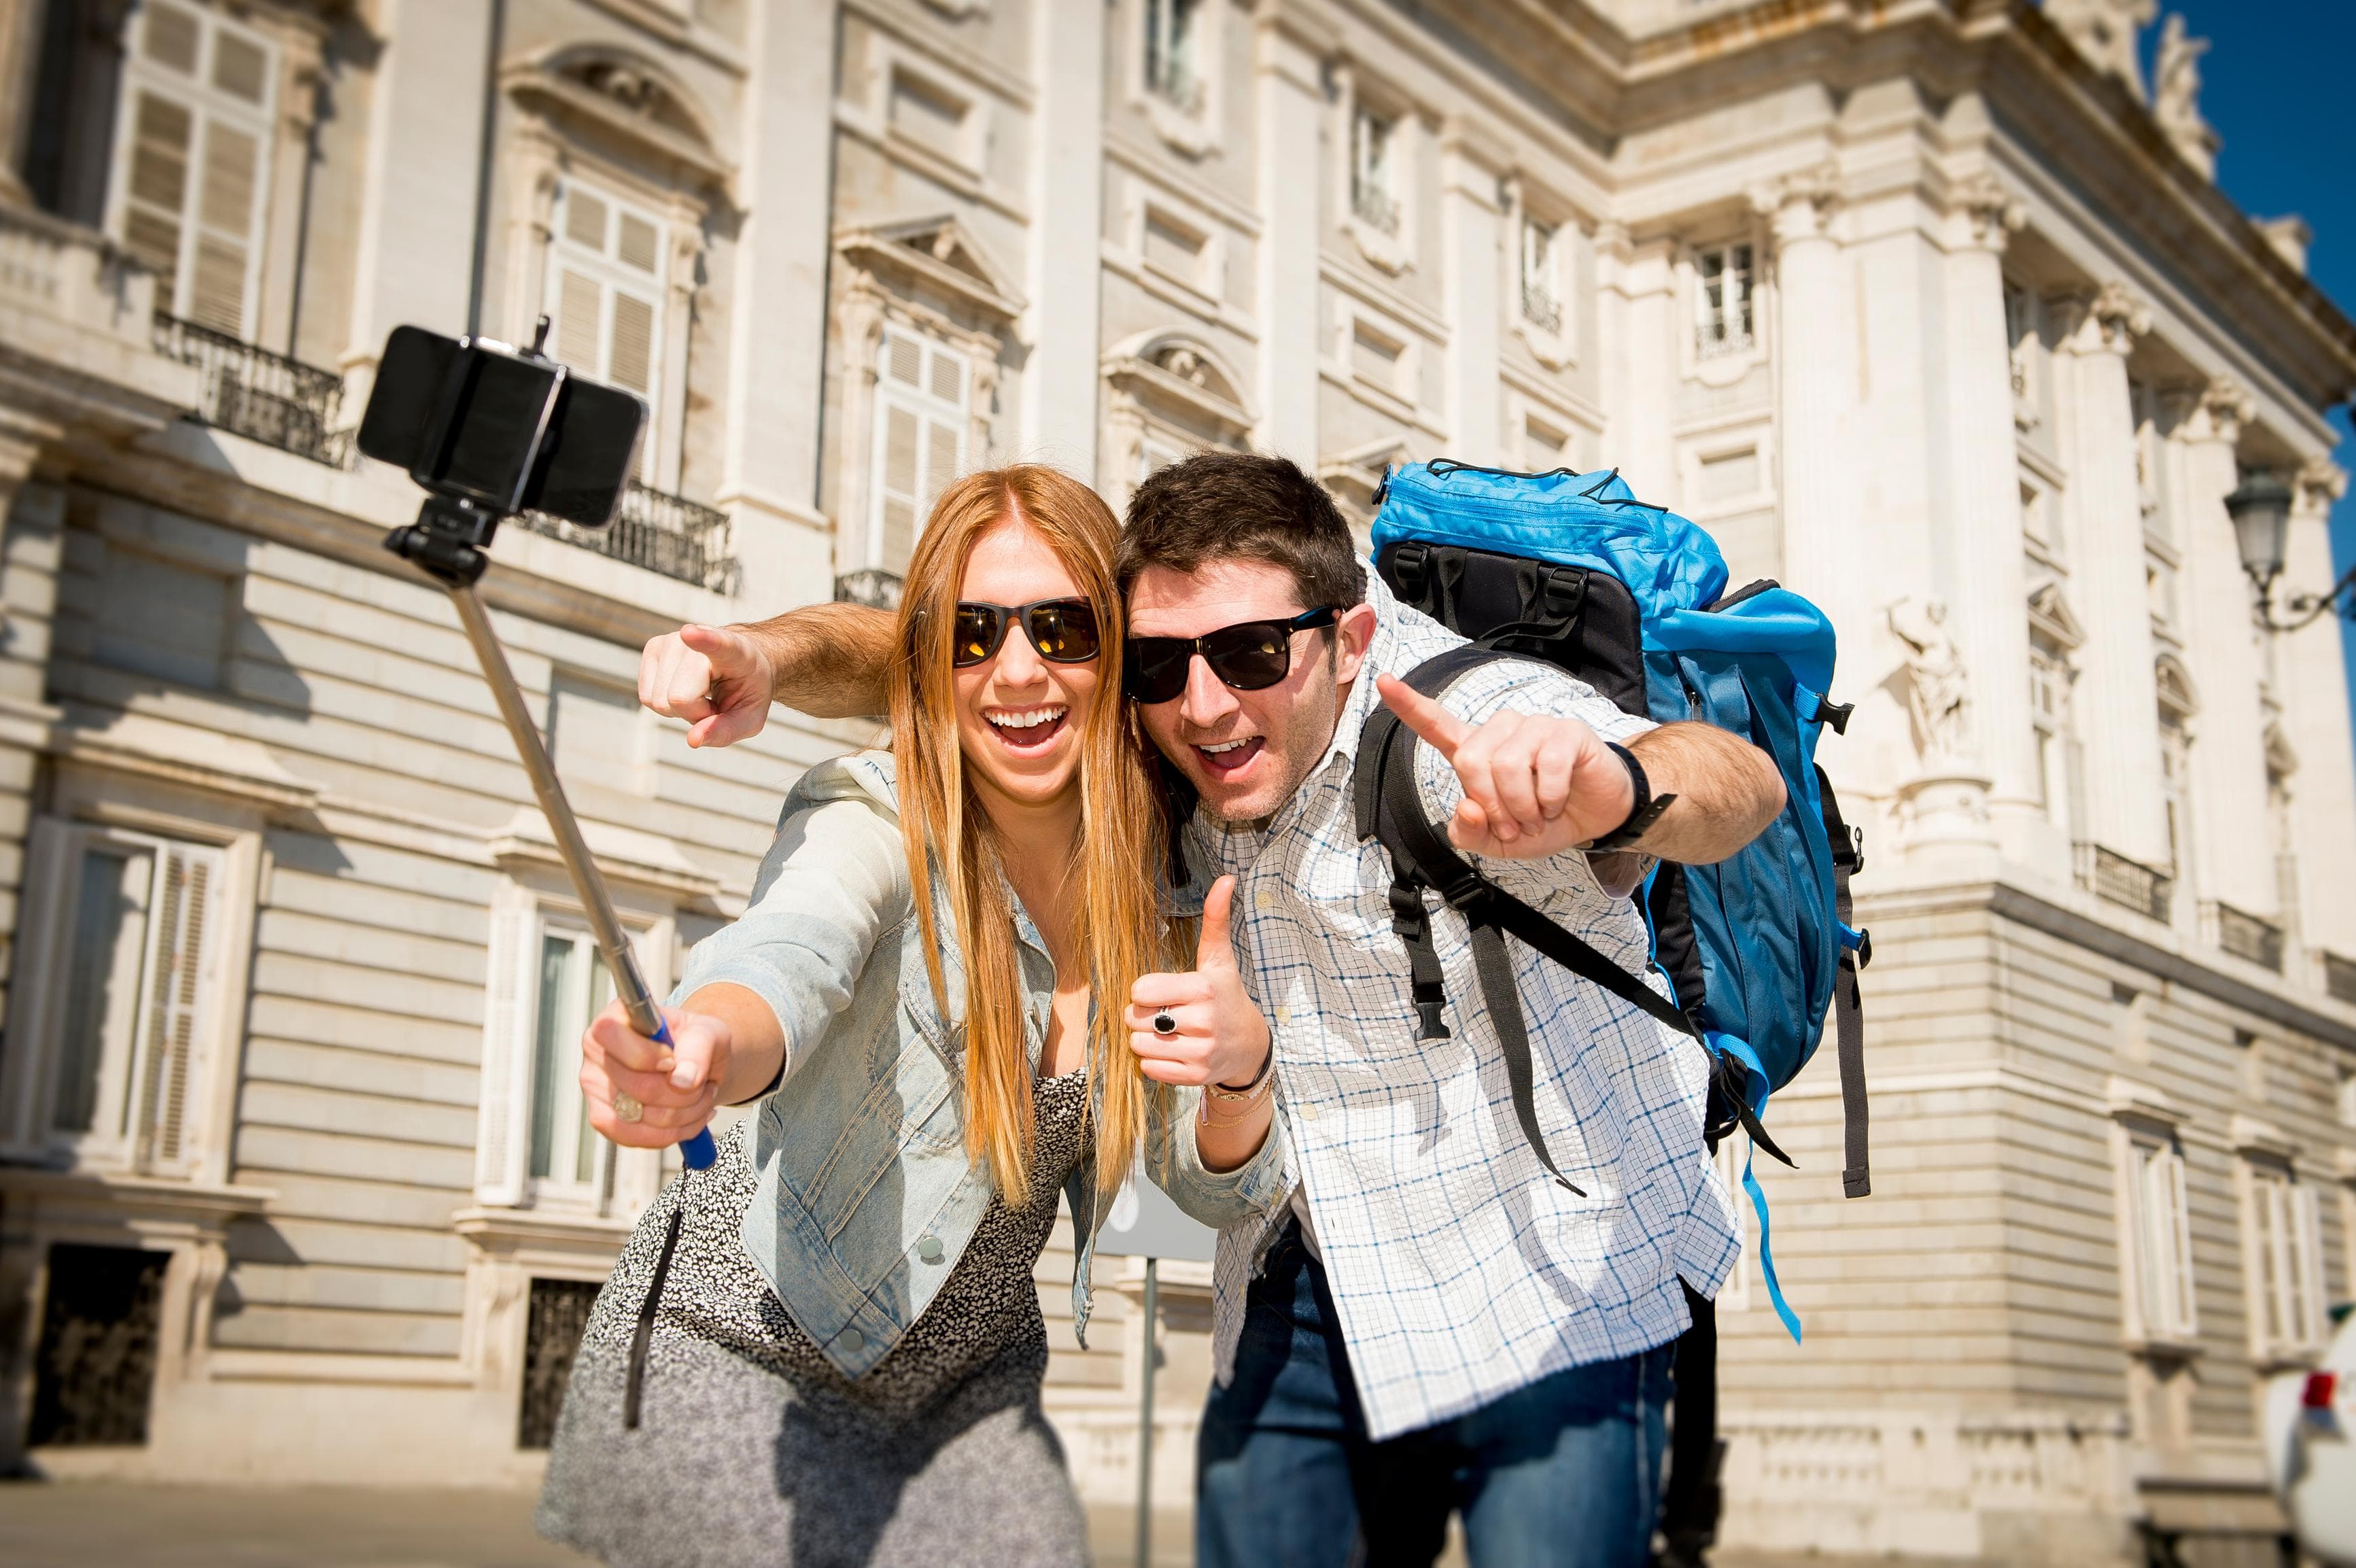 Tourists with Selfie Stick in Spain